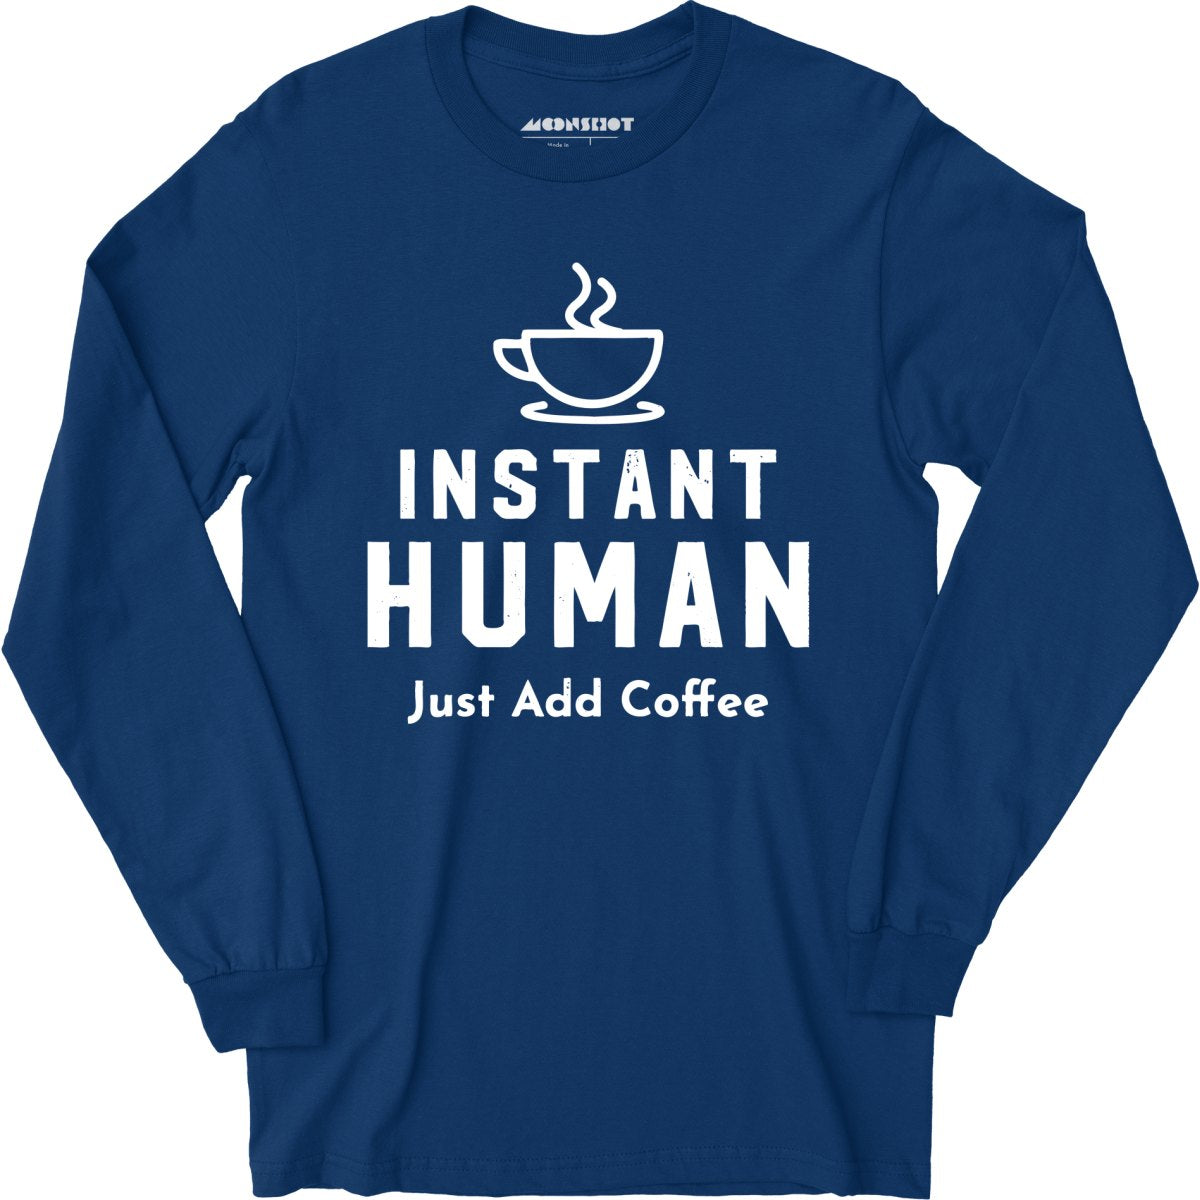 Instant Human Just Add Coffee - Long Sleeve T-Shirt